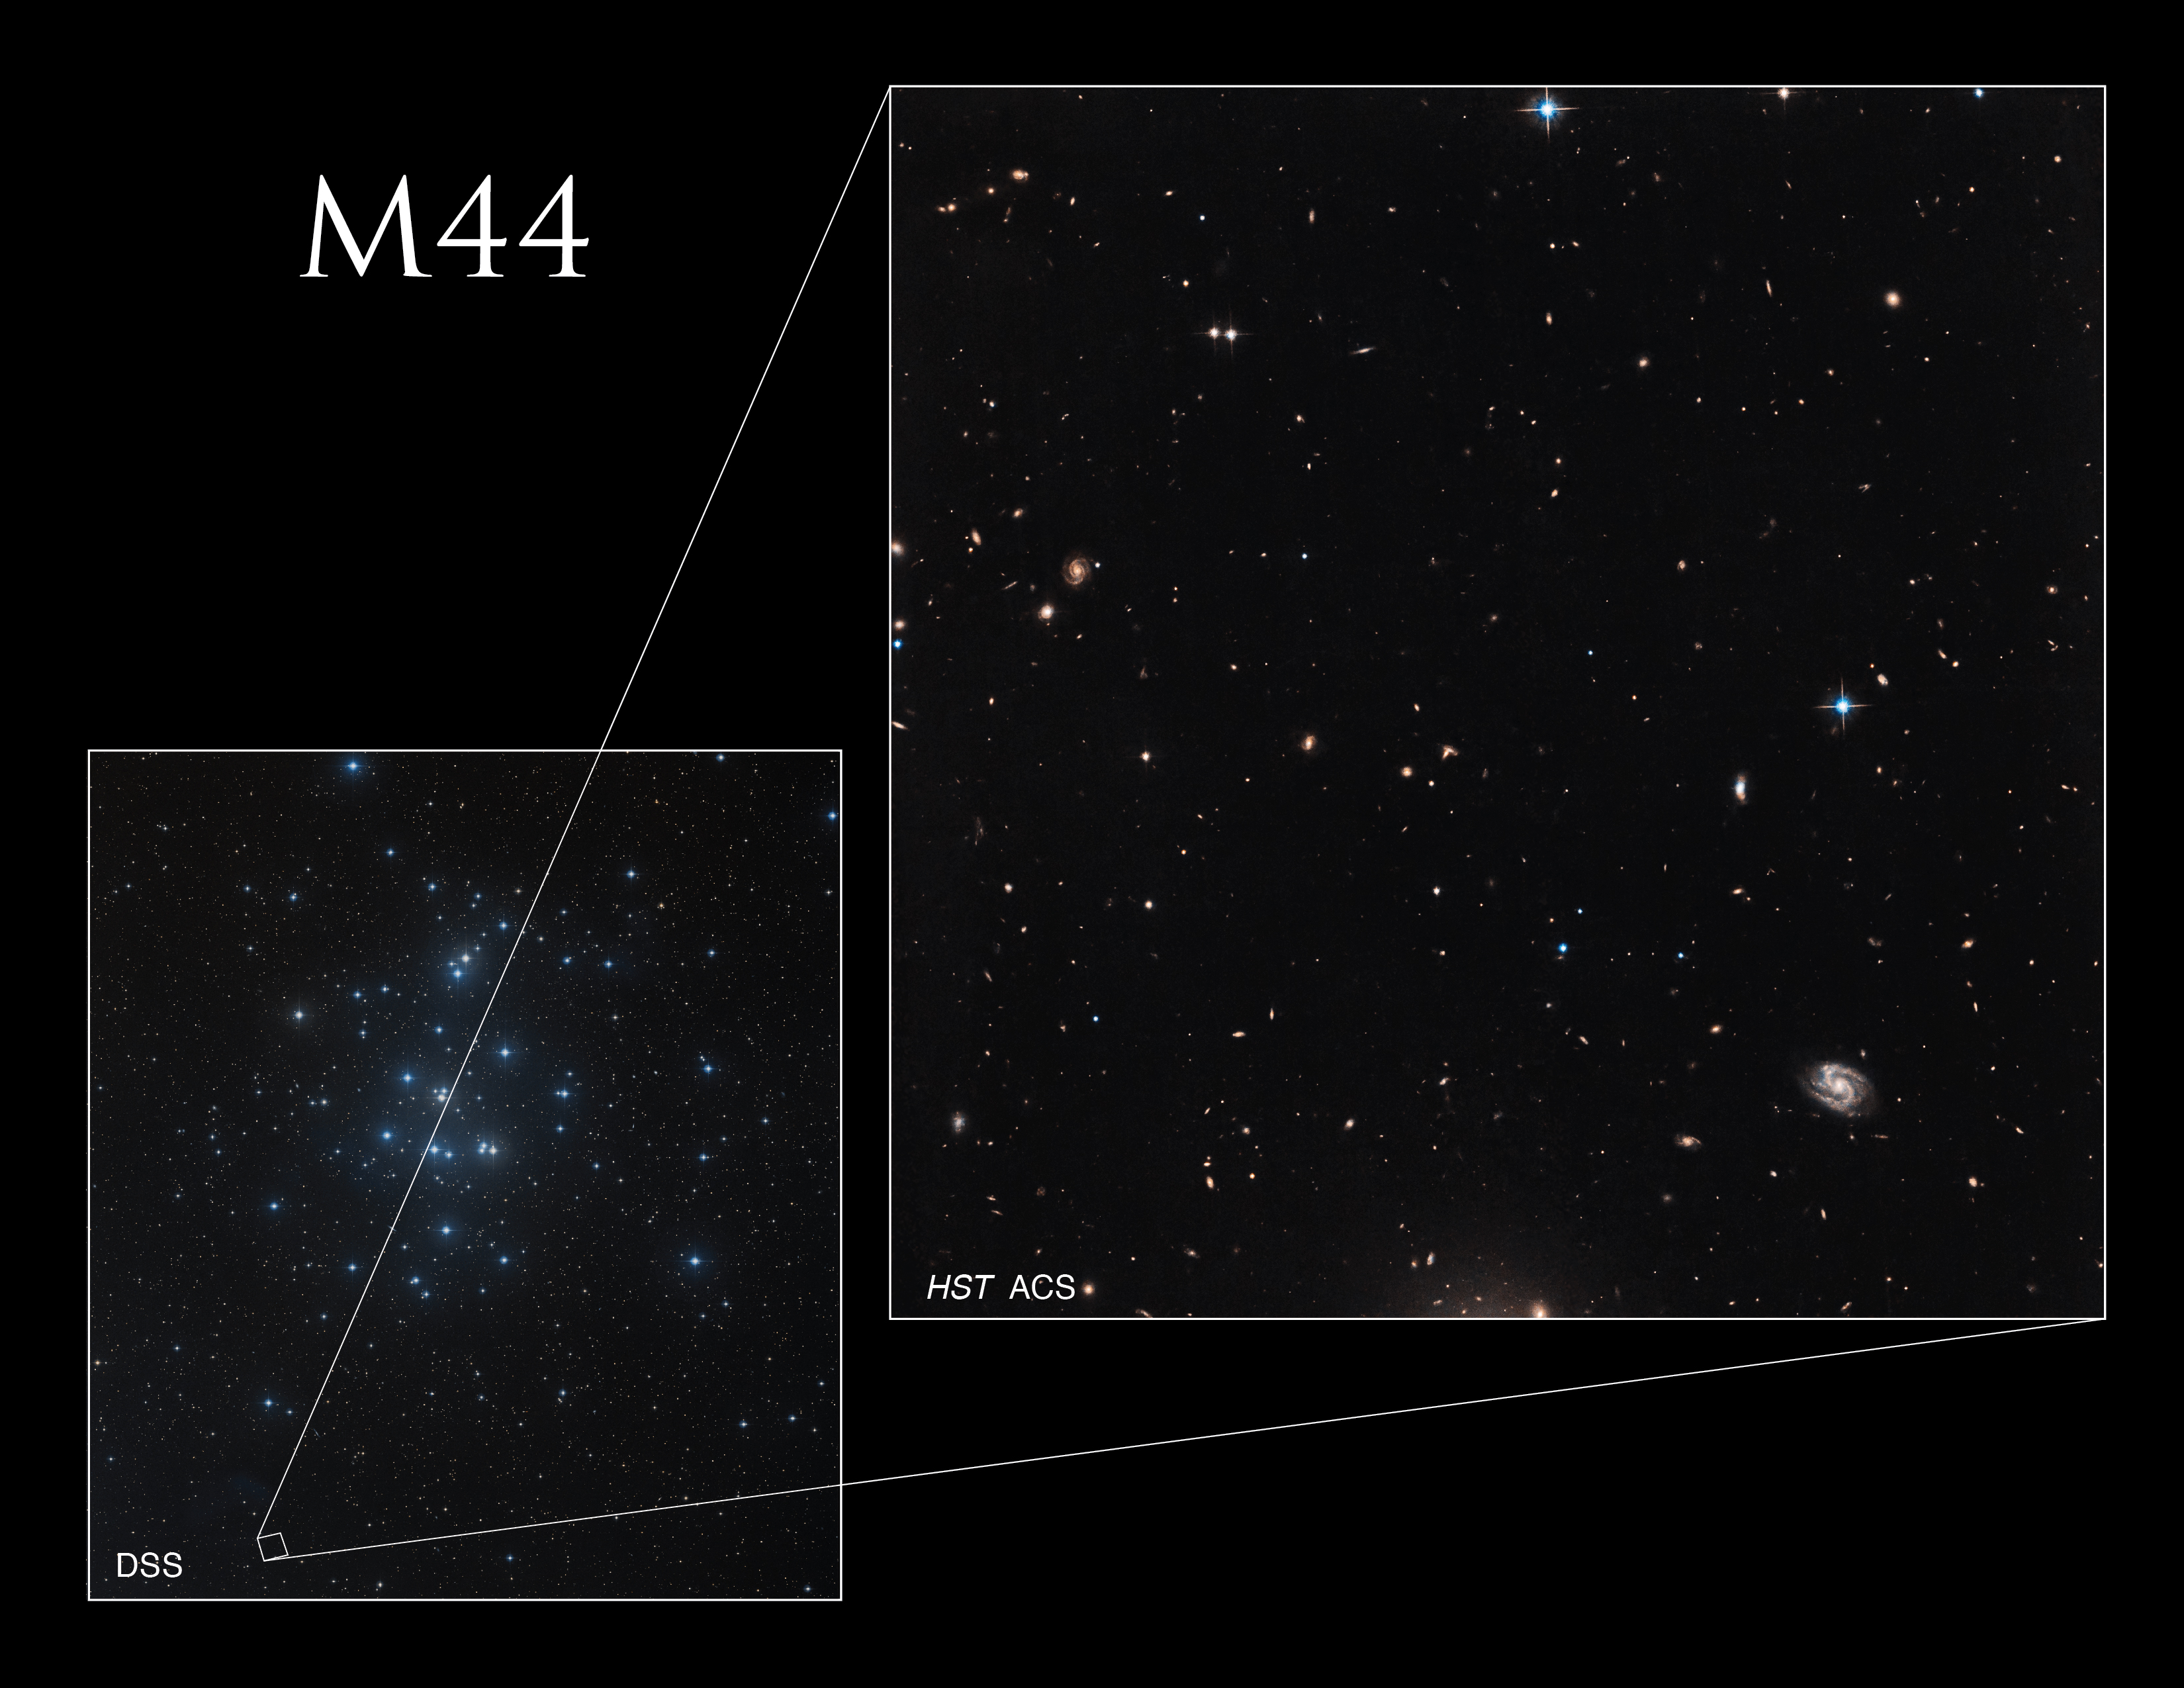 This picture shows a ground based image of open cluster Messier 44 with many blue stars, and a small callout box on its far southwest edge that shows the location of the Hubble image.